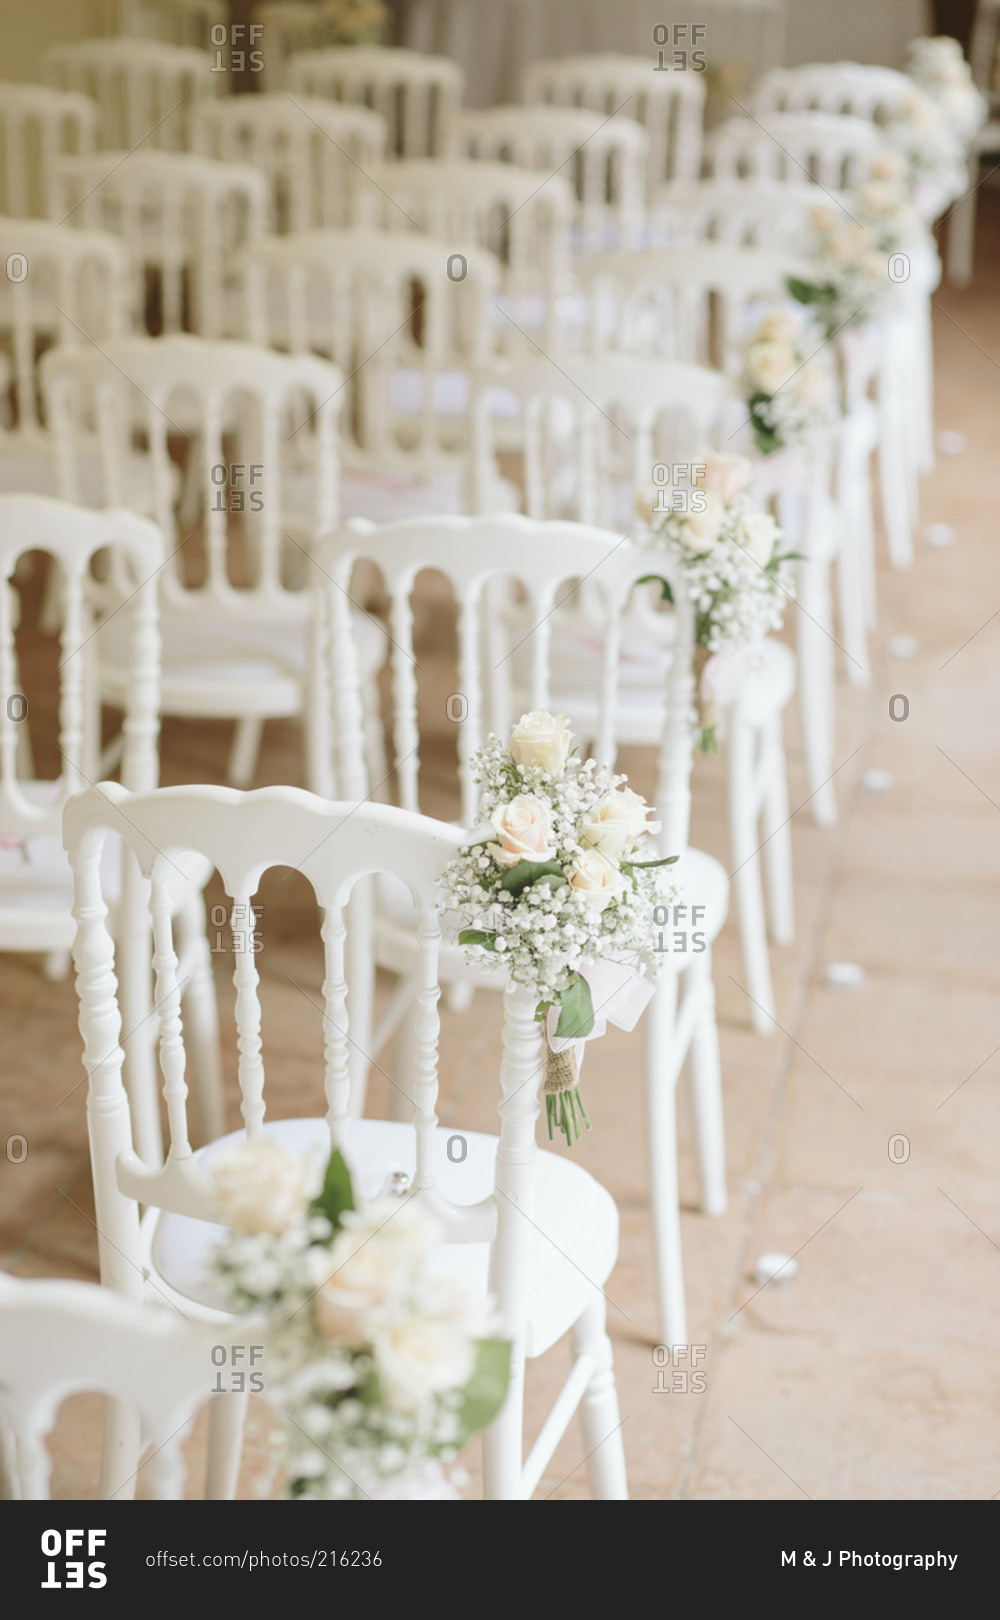 Chairs, flowers set up for wedding